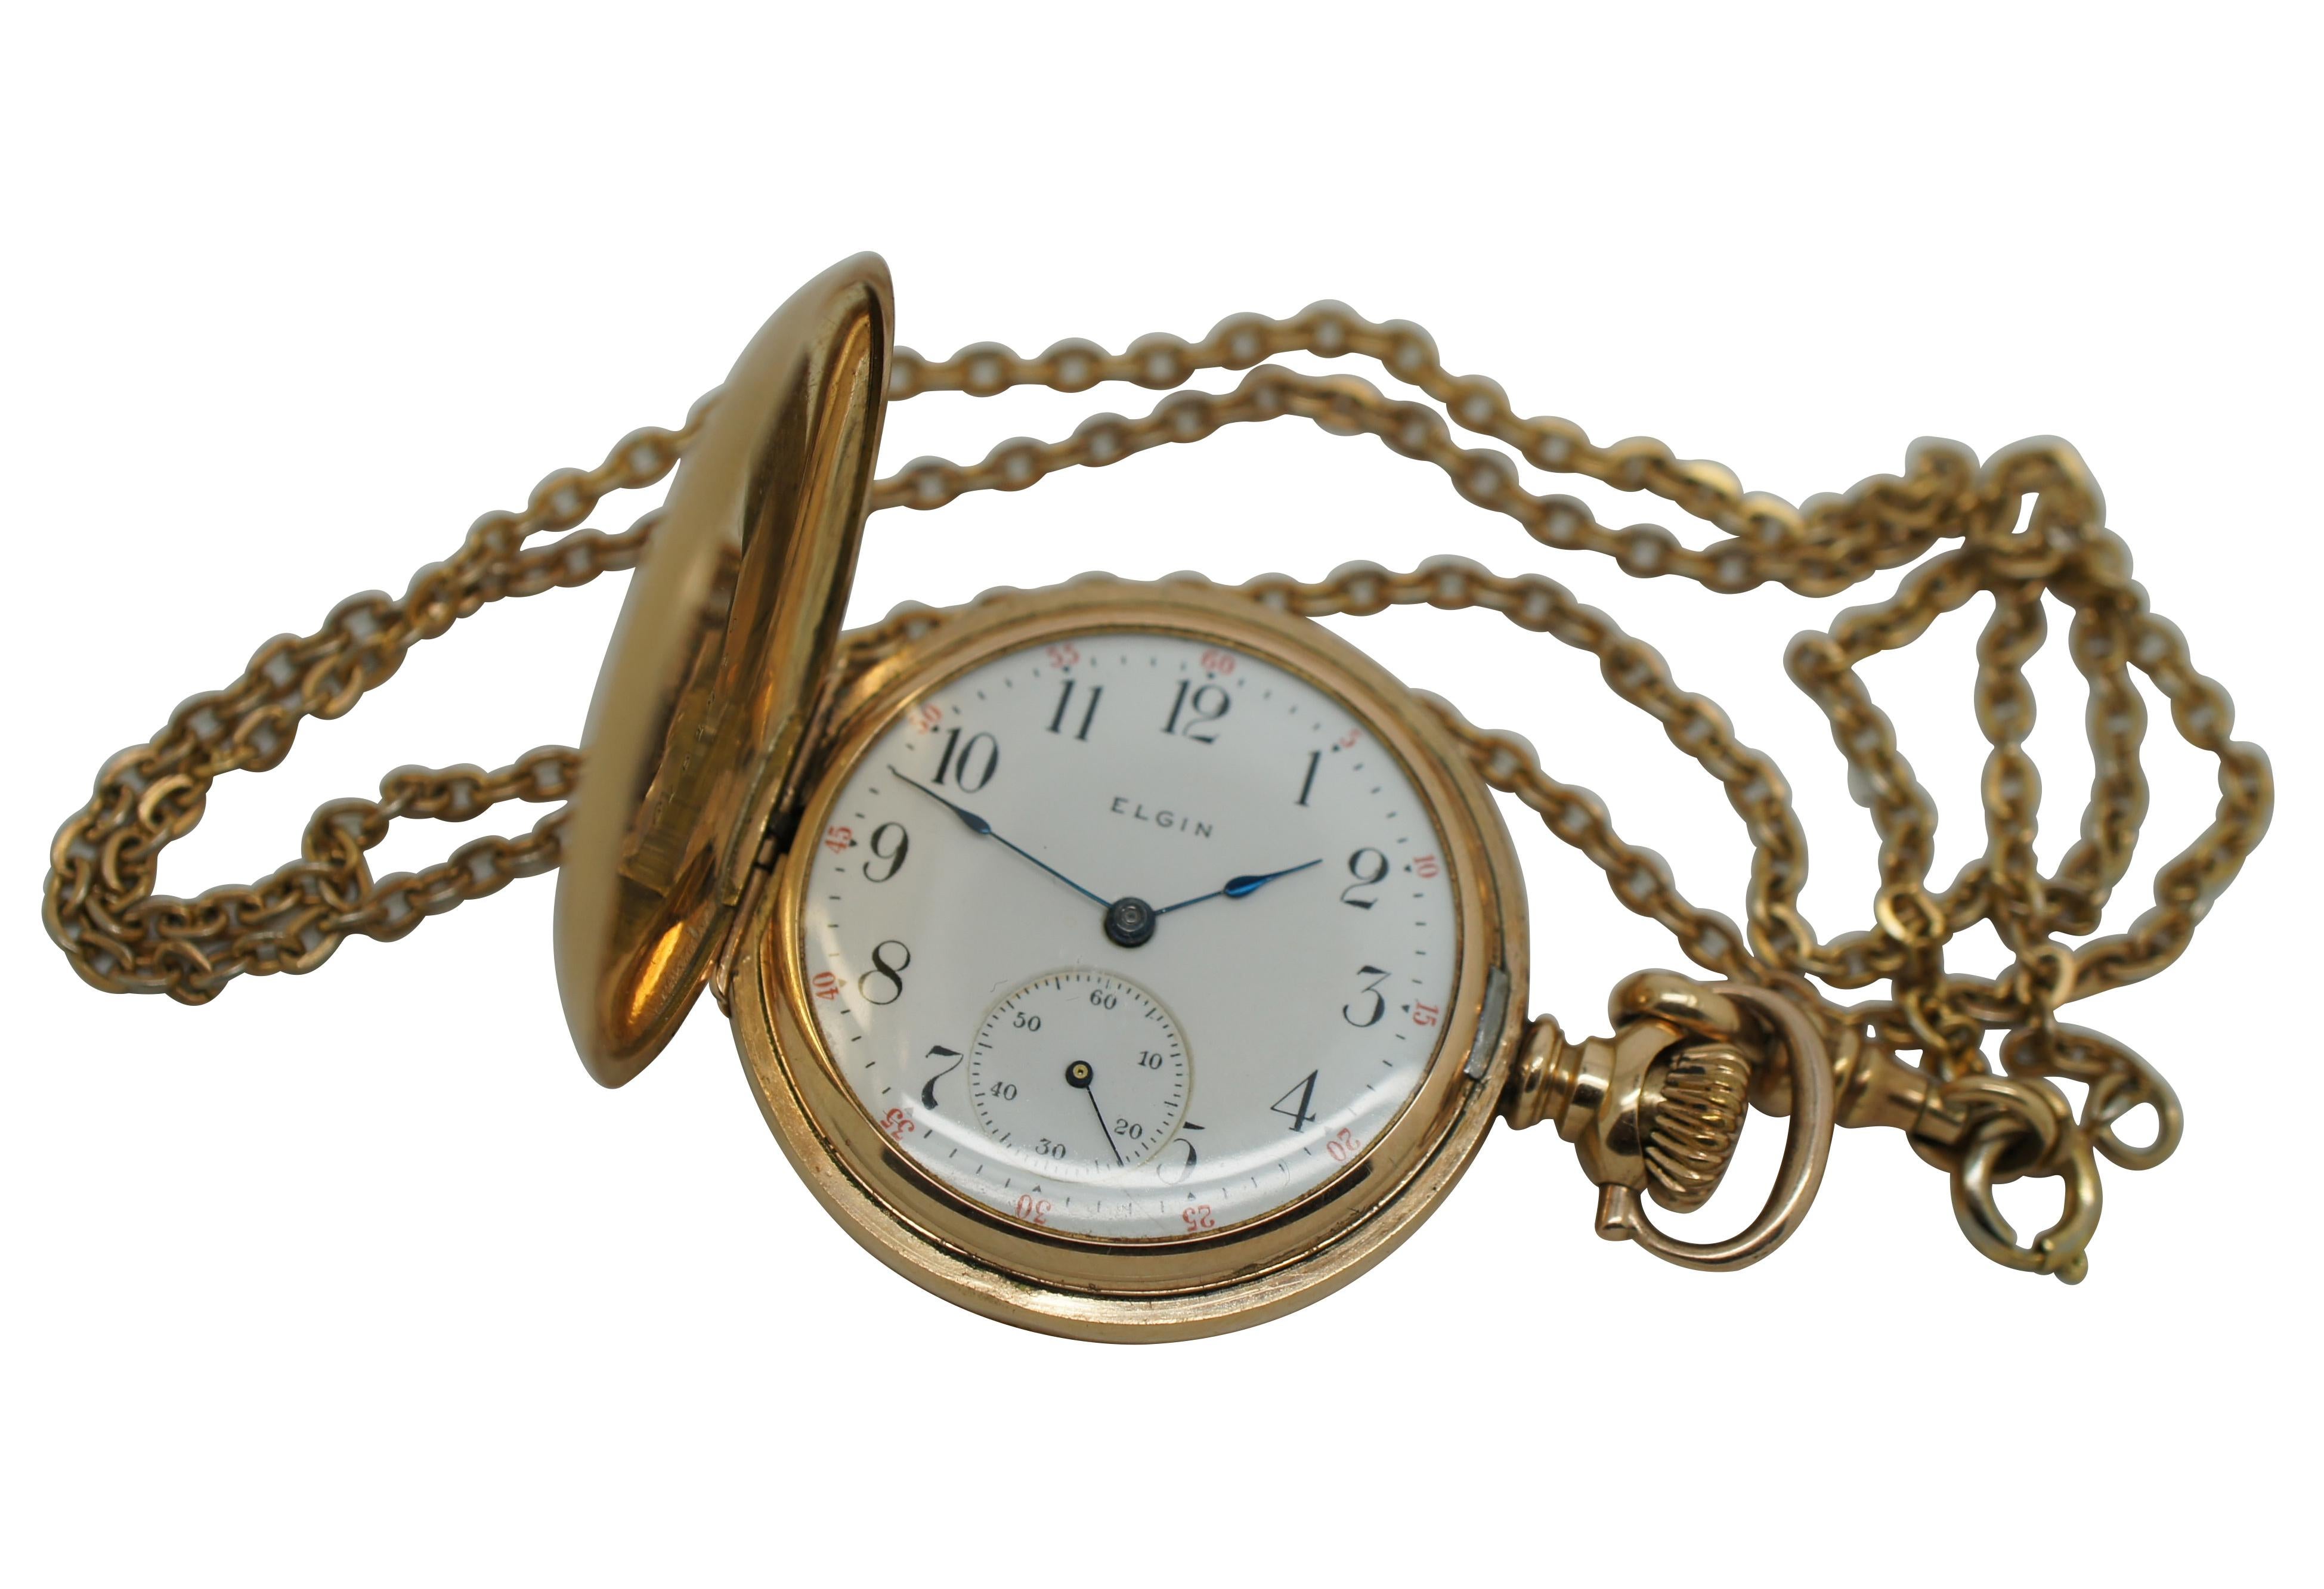 Antique early 20th century ladies pocket watch / time piece and chain by Elgin National Watch Company featuring a 14k gold filled Dueber Special case (numbered 6161739) sporting a textured diamond pattern and etched with a floral / foliate motif